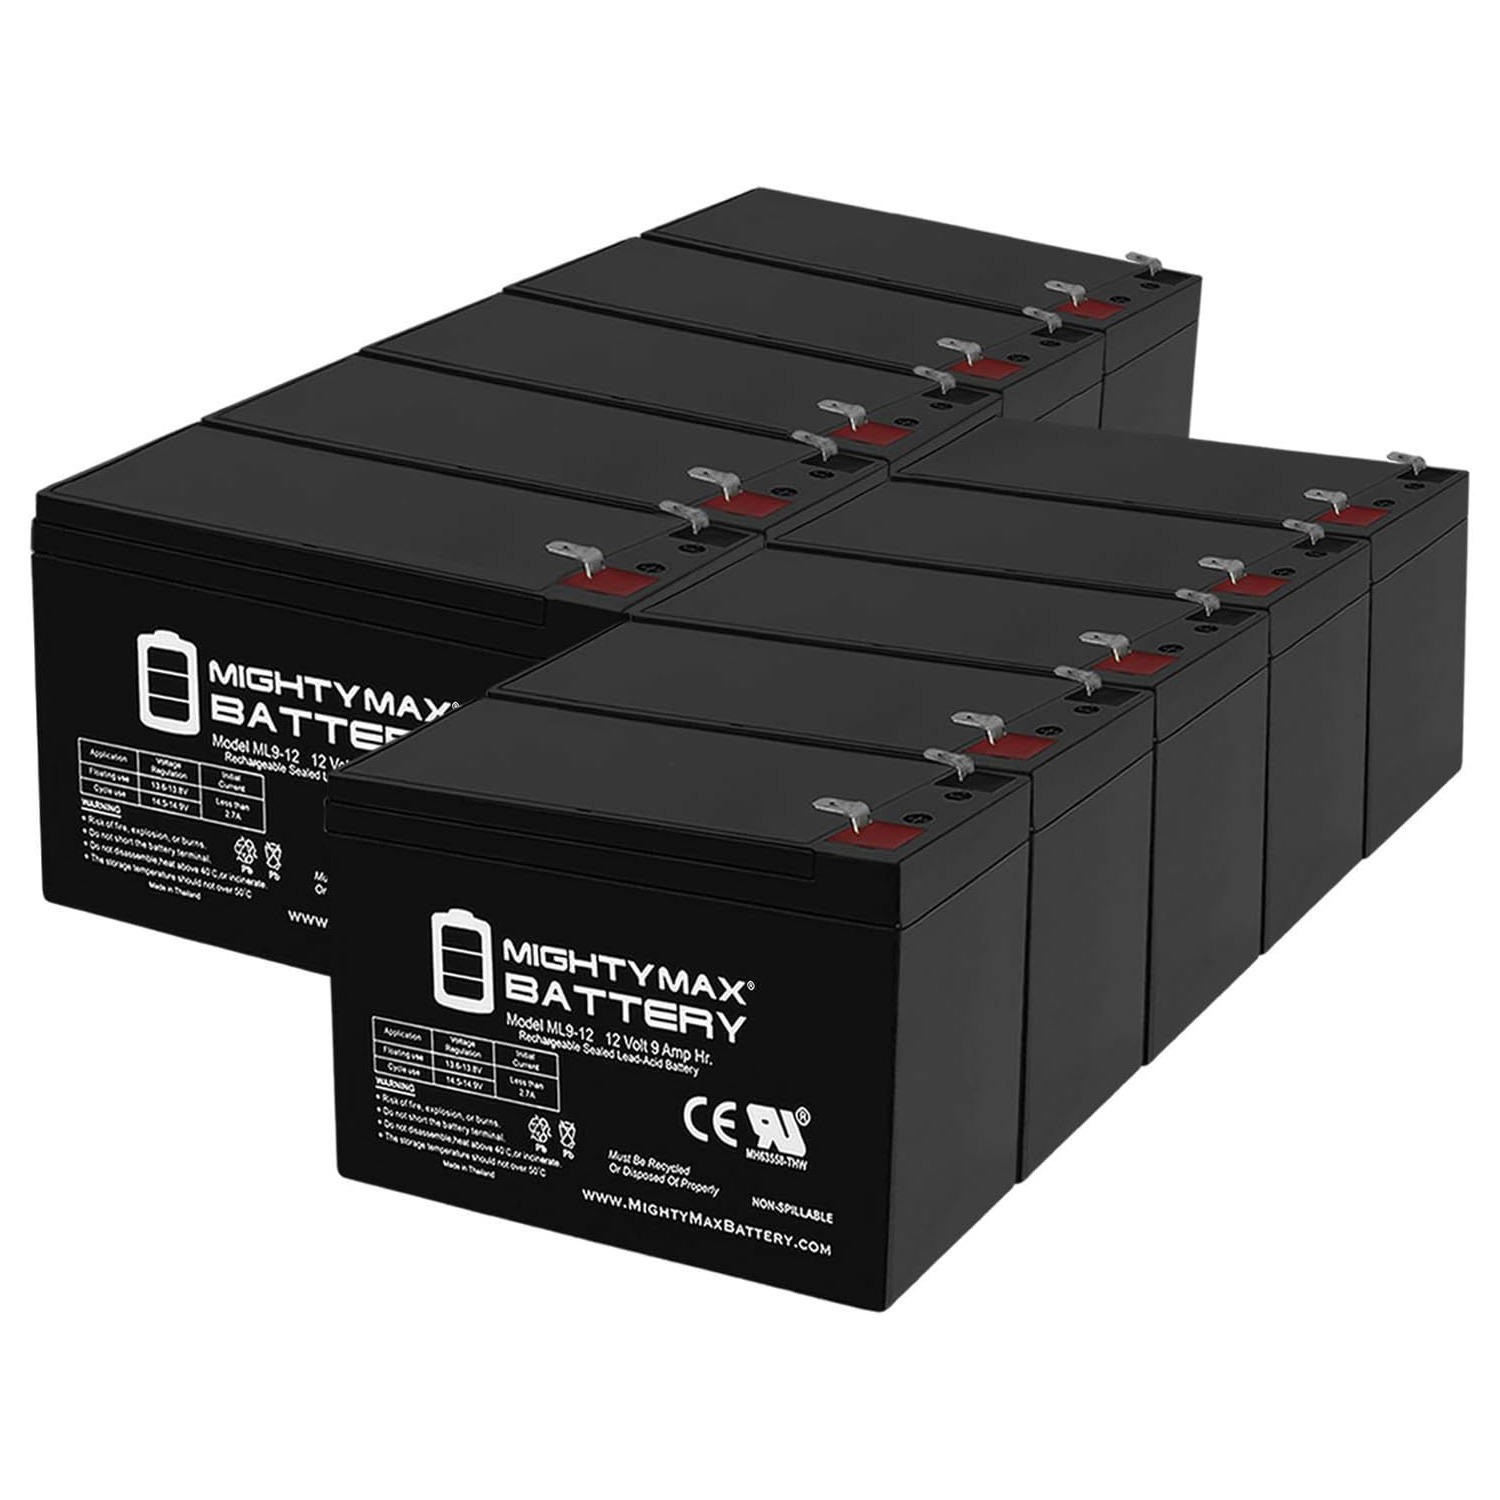 Altronix SMP7PMCTXPD4CB 12V, 9Ah Lead Acid Battery - 10 Pack